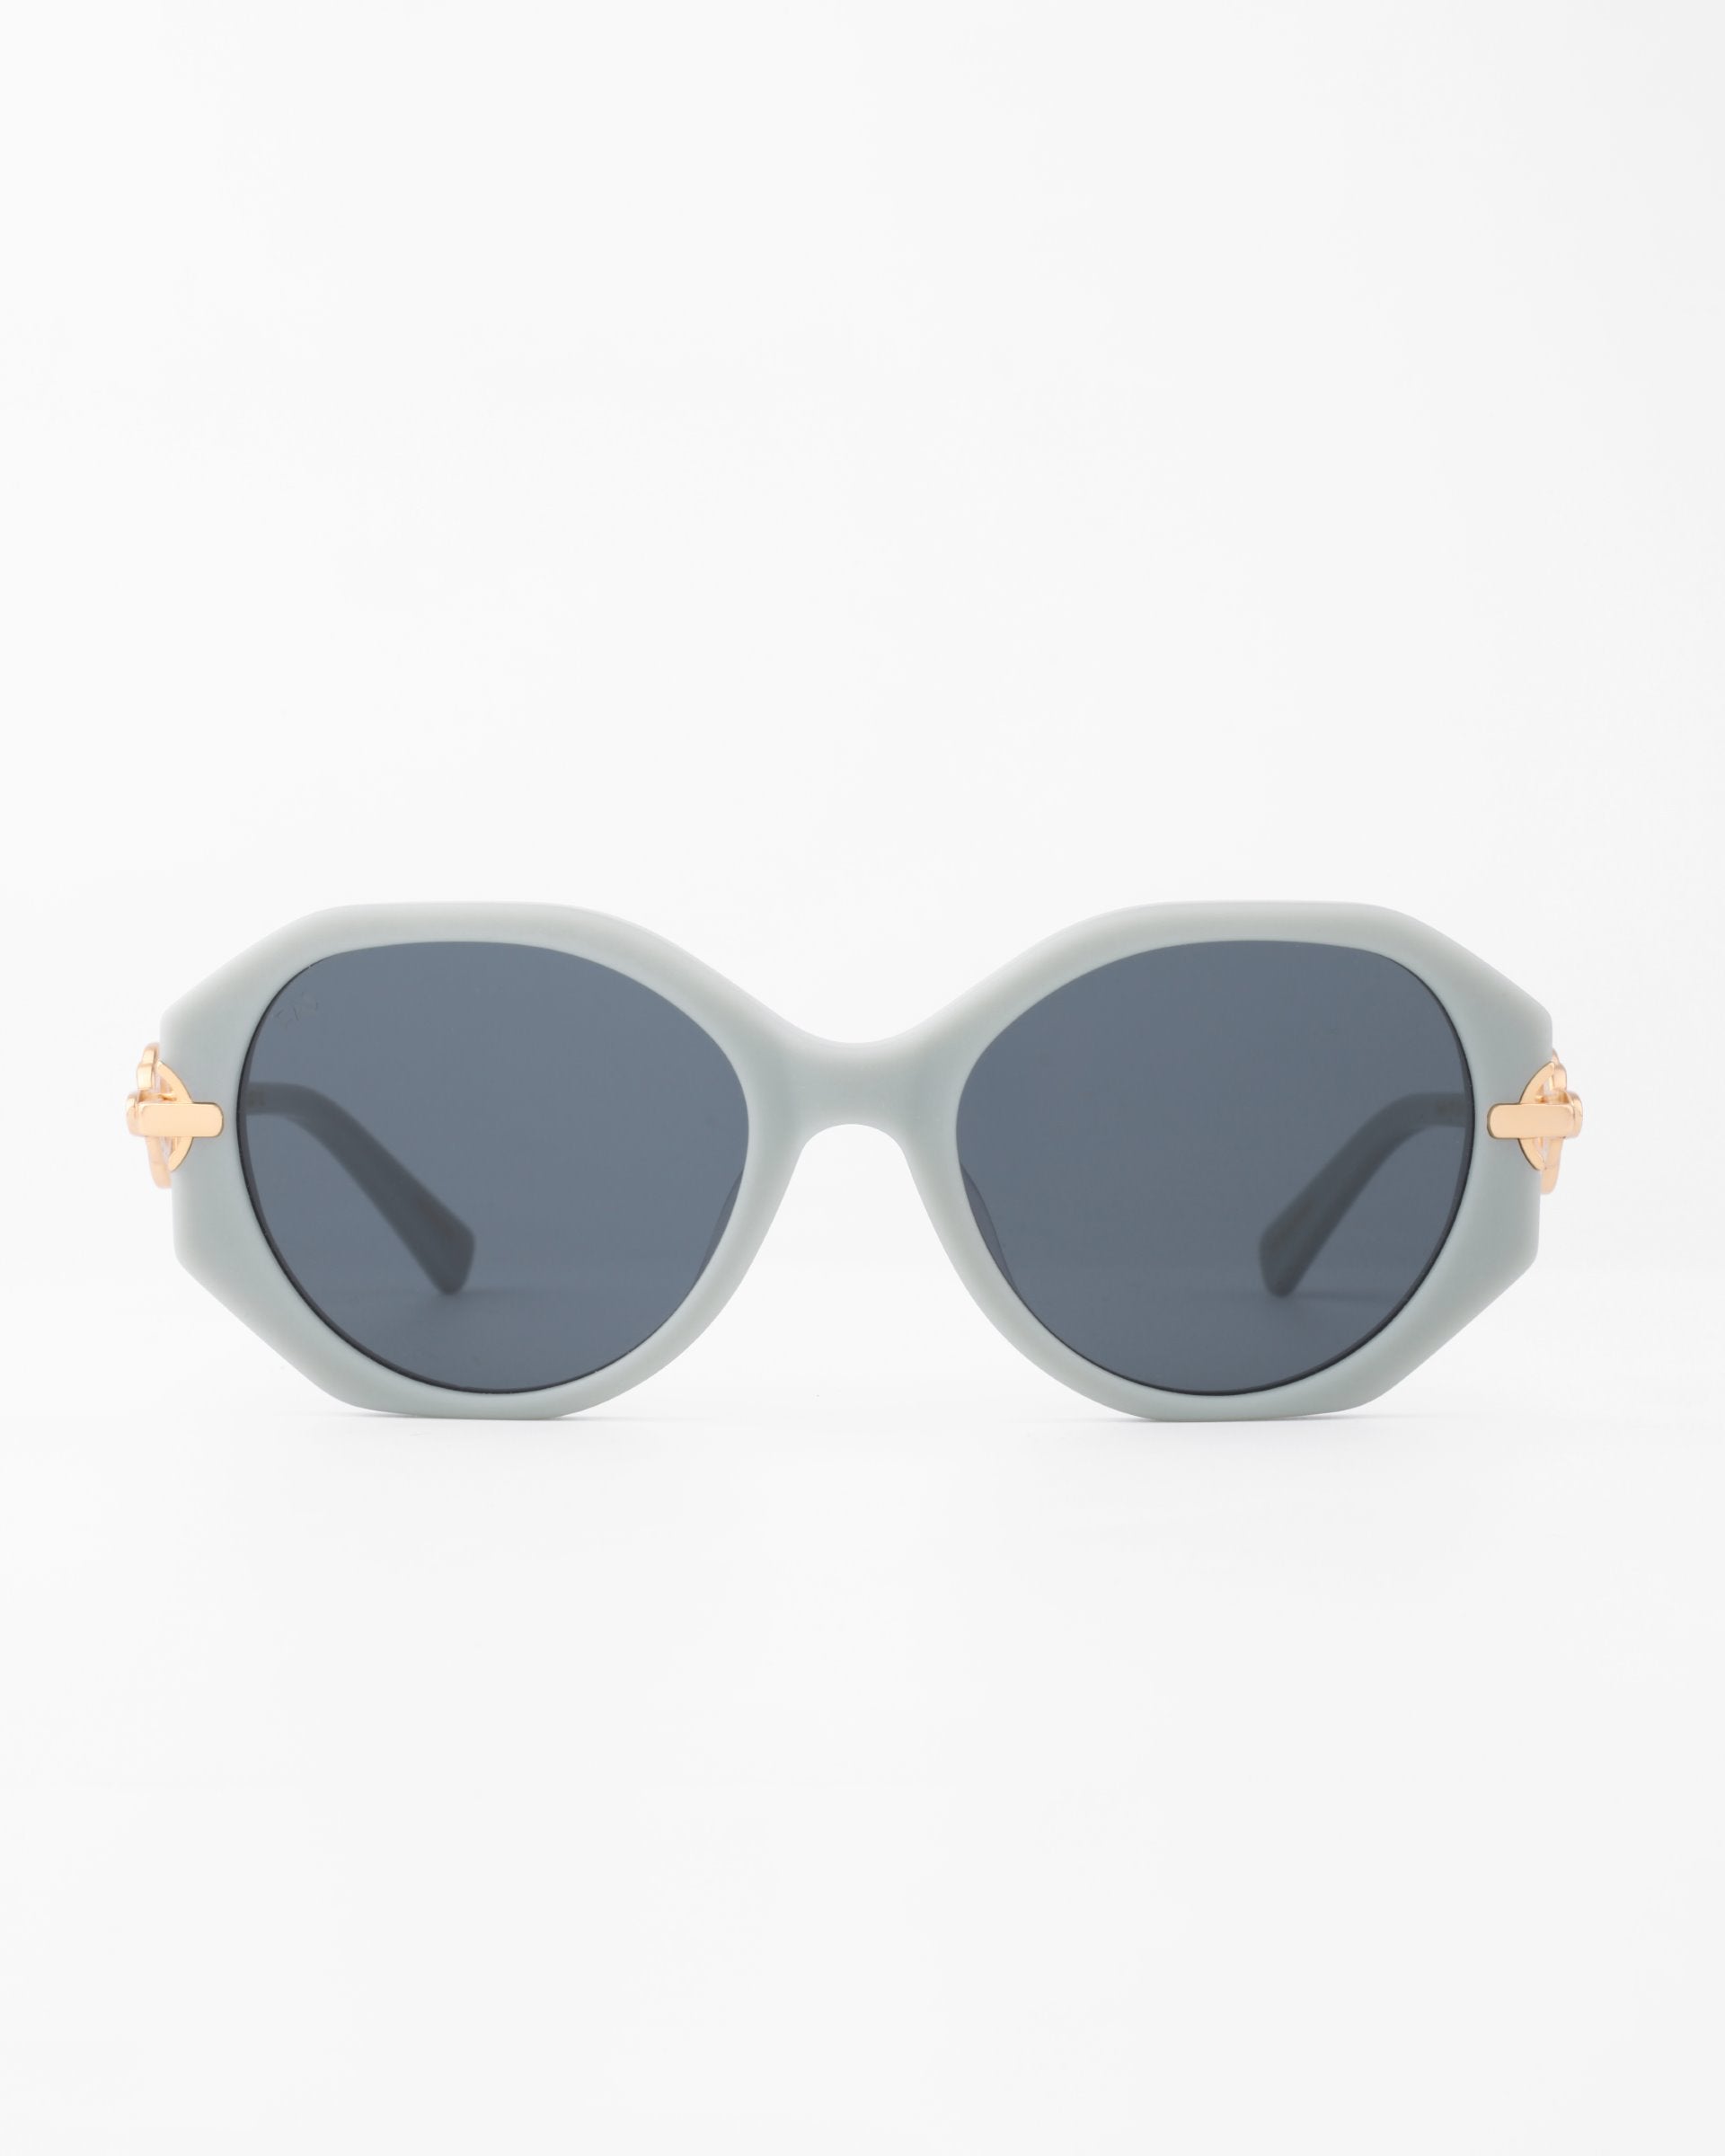 A pair of light gray oval-shaped Seaside sunglasses by For Art&#39;s Sake® with dark blue, shatter-resistant lenses. The handmade acetate frame features gold-plated temple detailing on a plain white background.